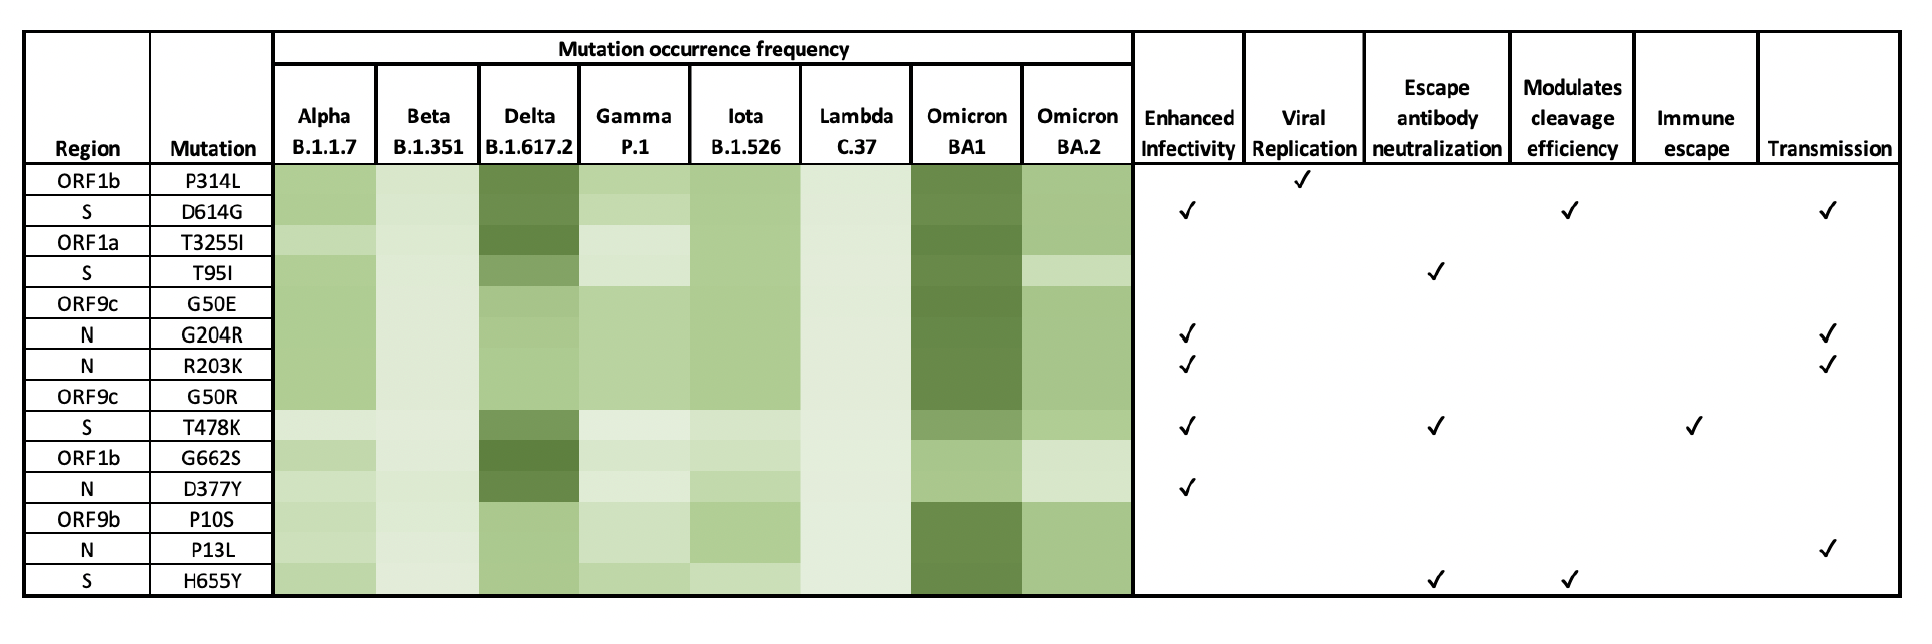 A table showing the functionality and heatmap of intensity of occurrence for the most frequently-occurring COVID-19 amino acid mutations, in order of decreasing occurrence from top to bottom. The darker colors indicate a higher frequency of mutation occurrence.